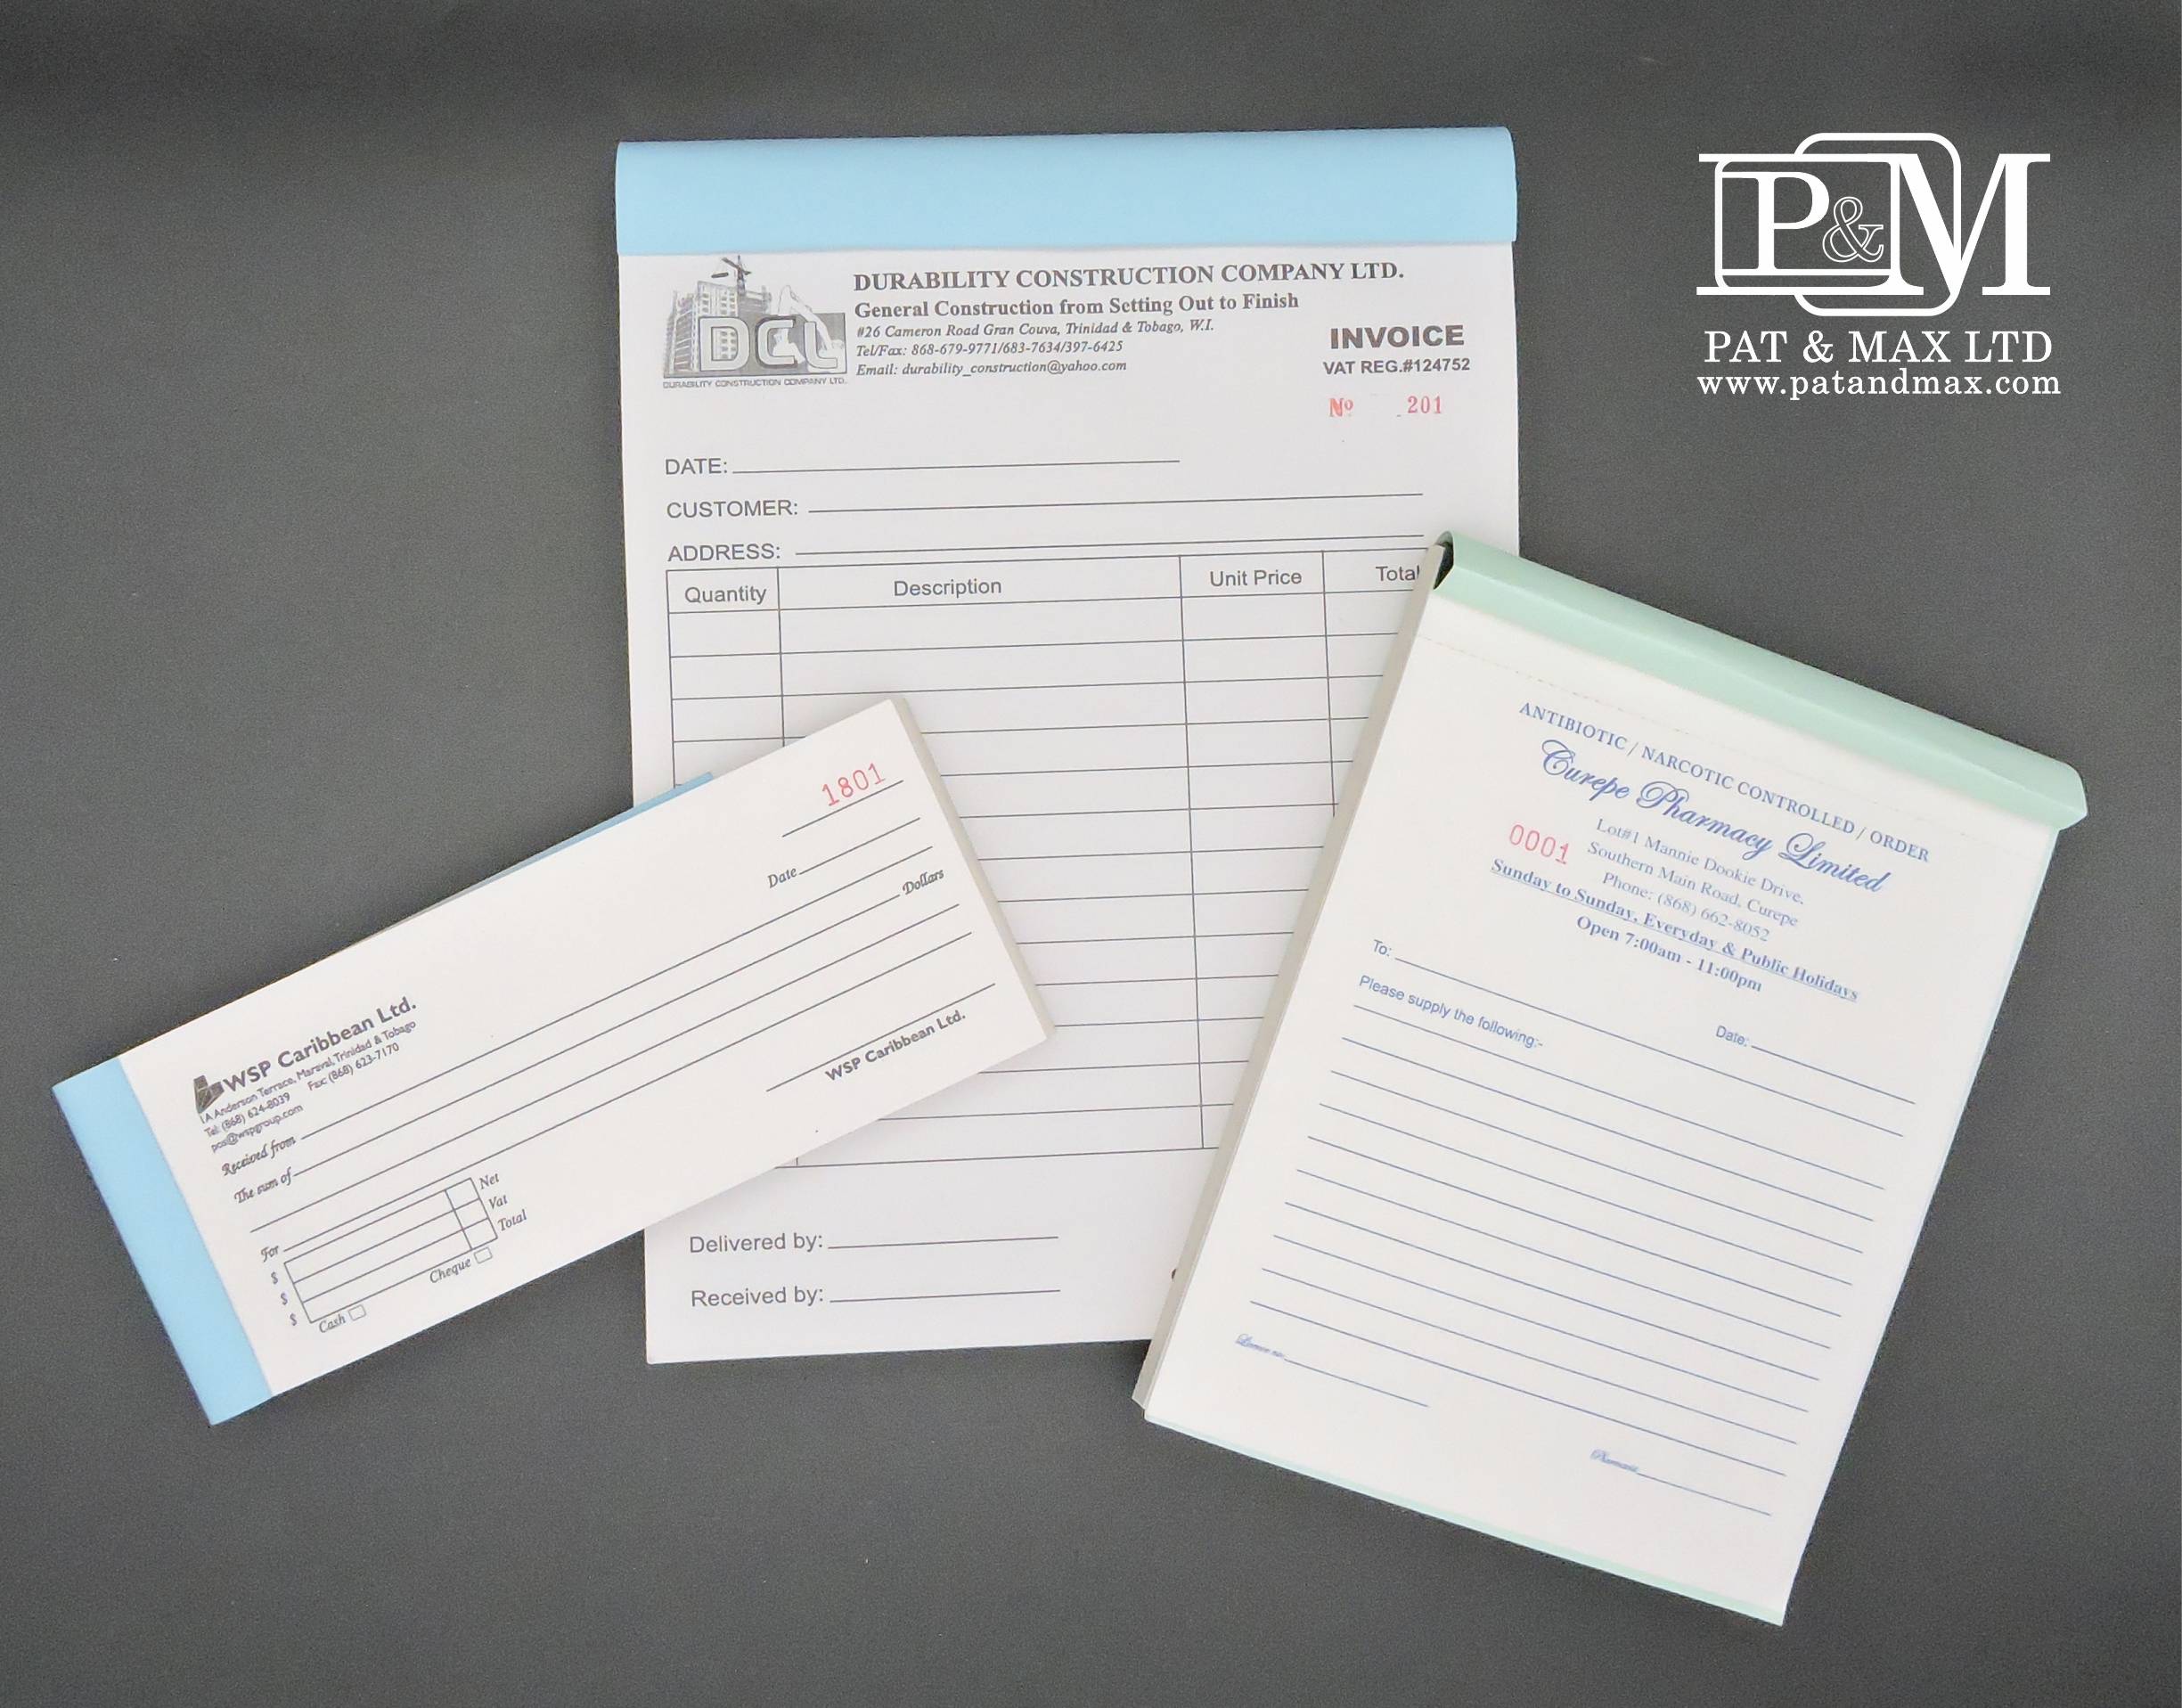 Pat & Max Ltd Plastic & ID Card Systems - RUBBER STAMPS